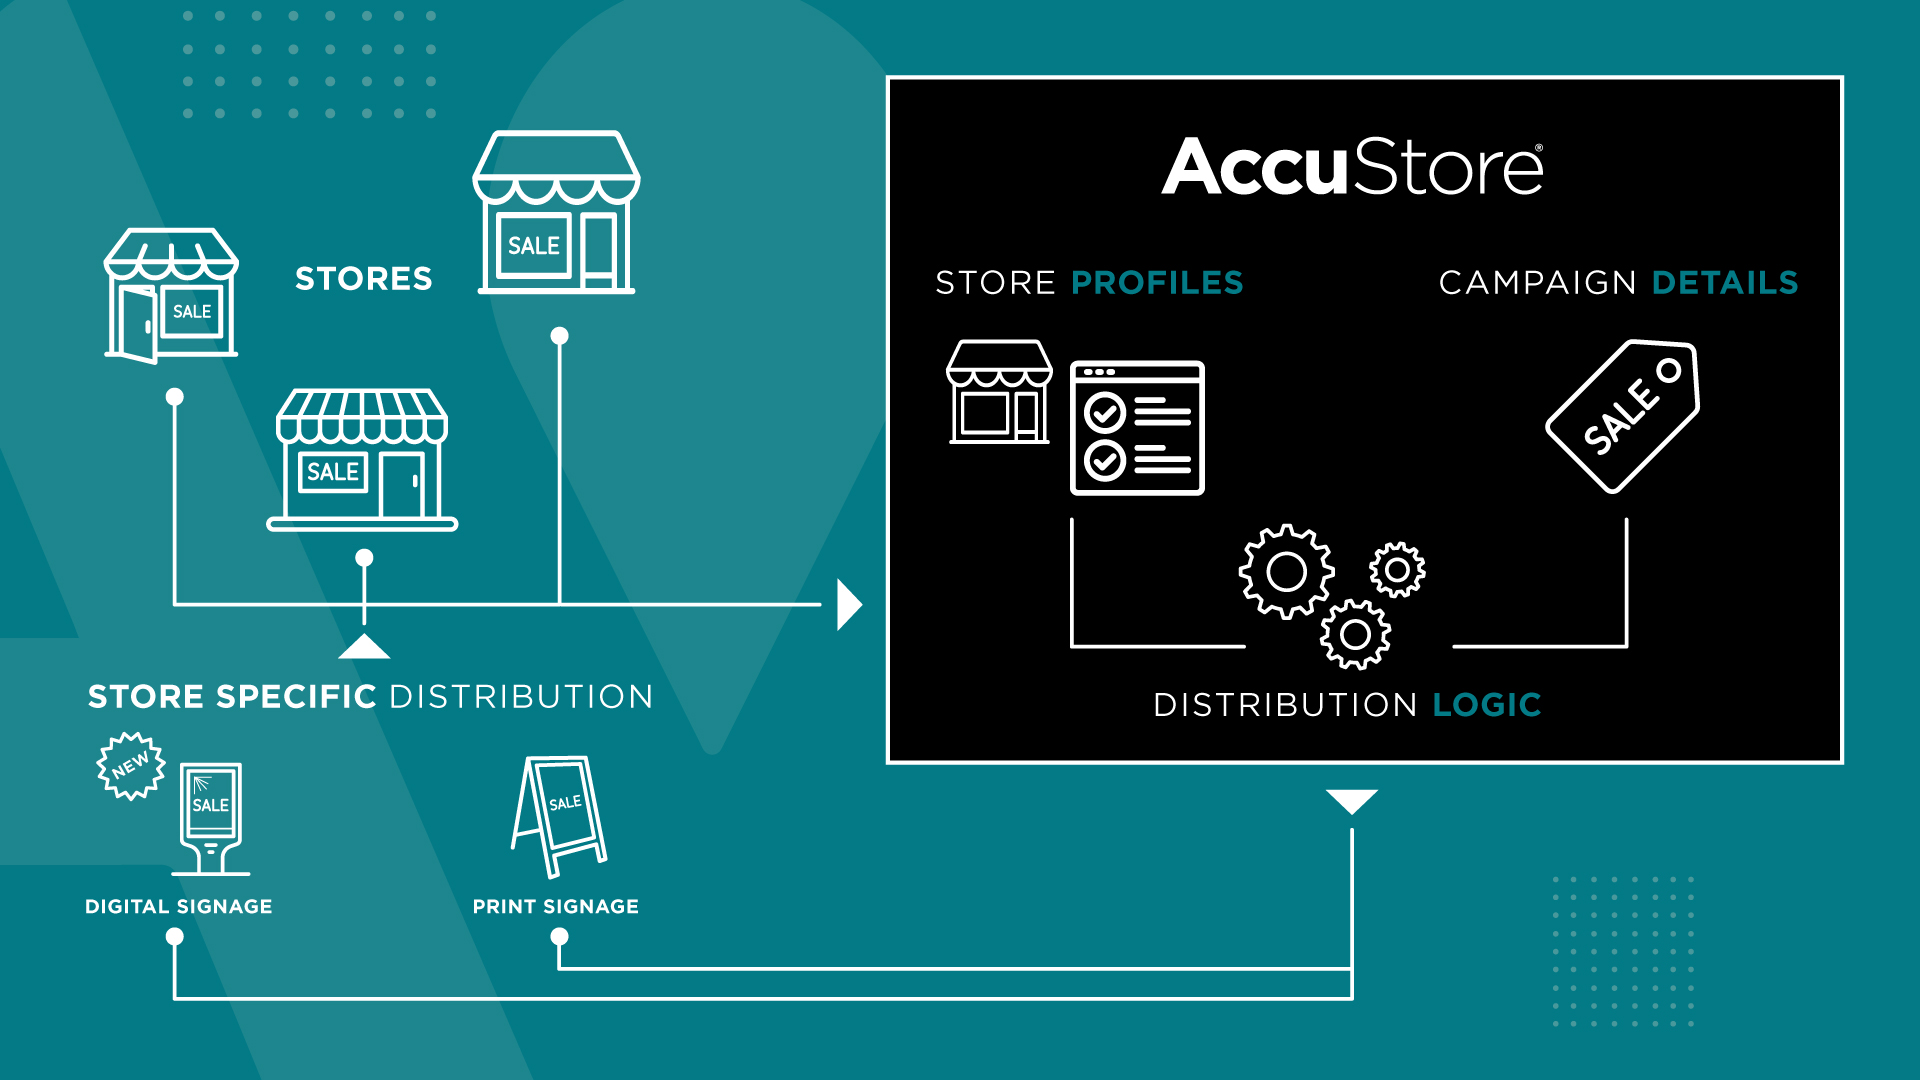 AccuStore Helps Retailers Manage and Target Marketing Messages and Content with New Digital Signage